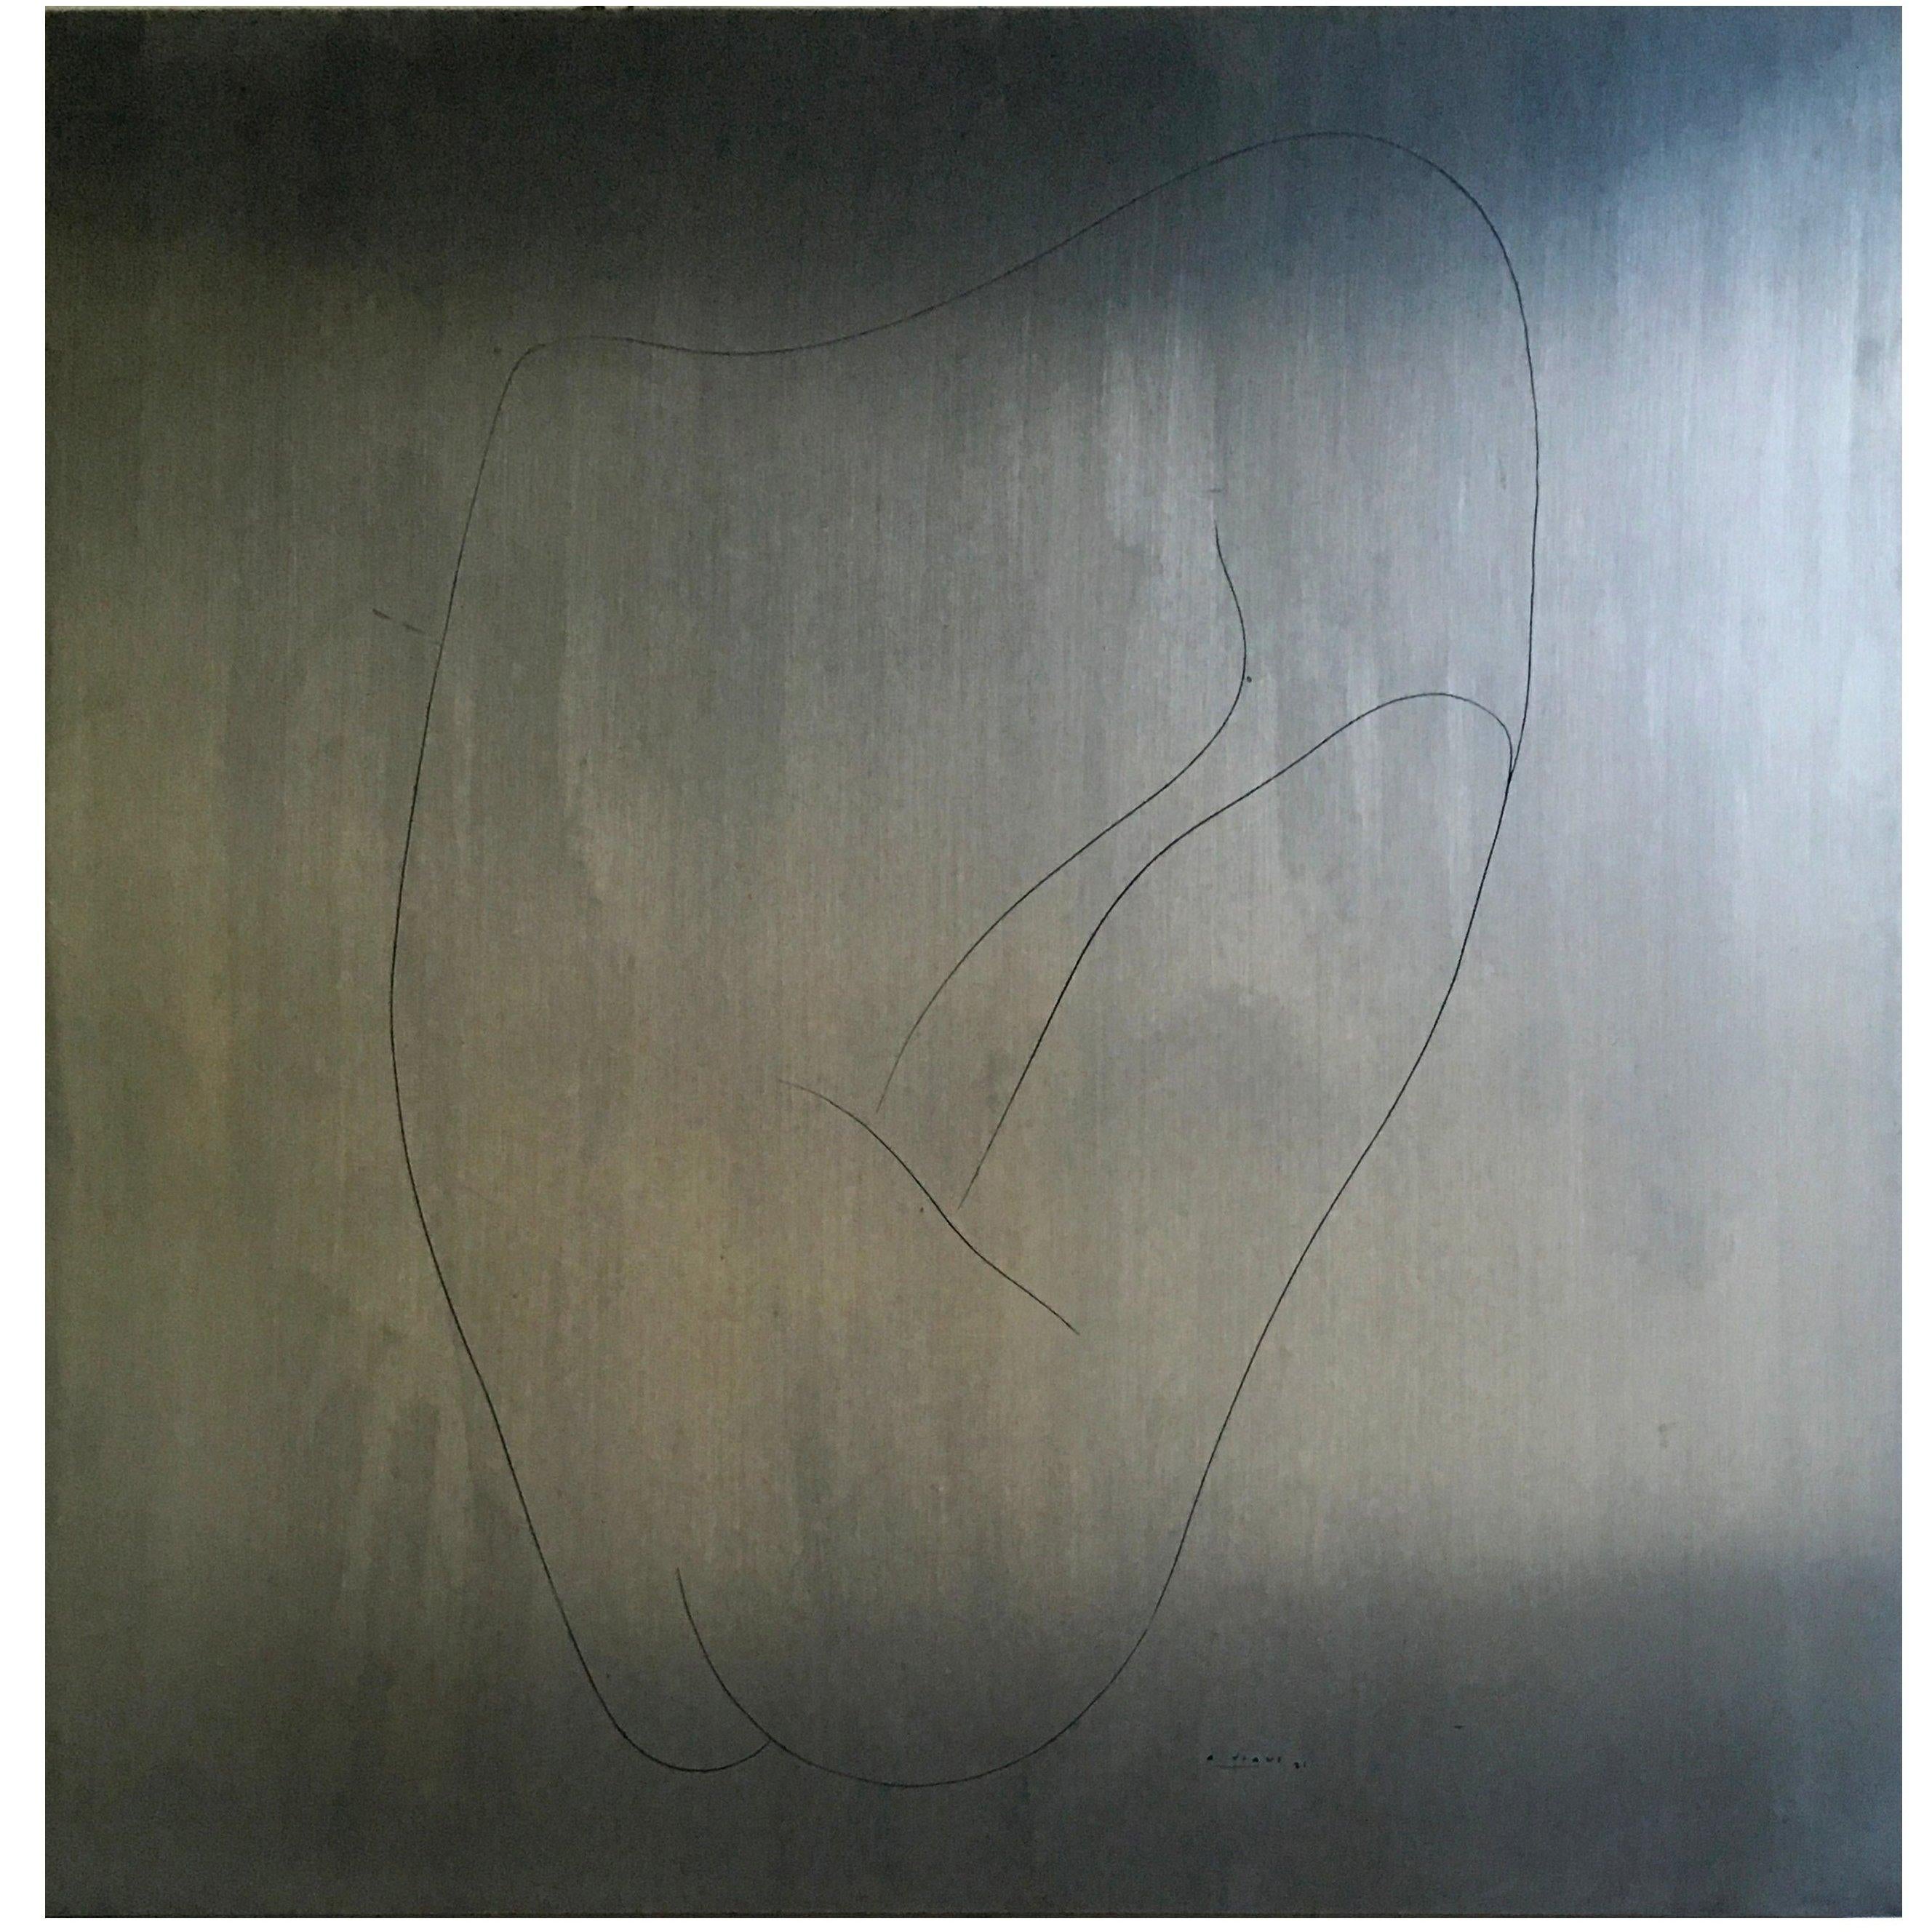 This aluminium painting engraved by Alberto Viani, is a soft female portrait. The woman's figure is in an ethereal way, as a poetry.
This artwork is a multiple of a limited edition of 200 pieces ( this is number 137)
There is no frame, the artwork